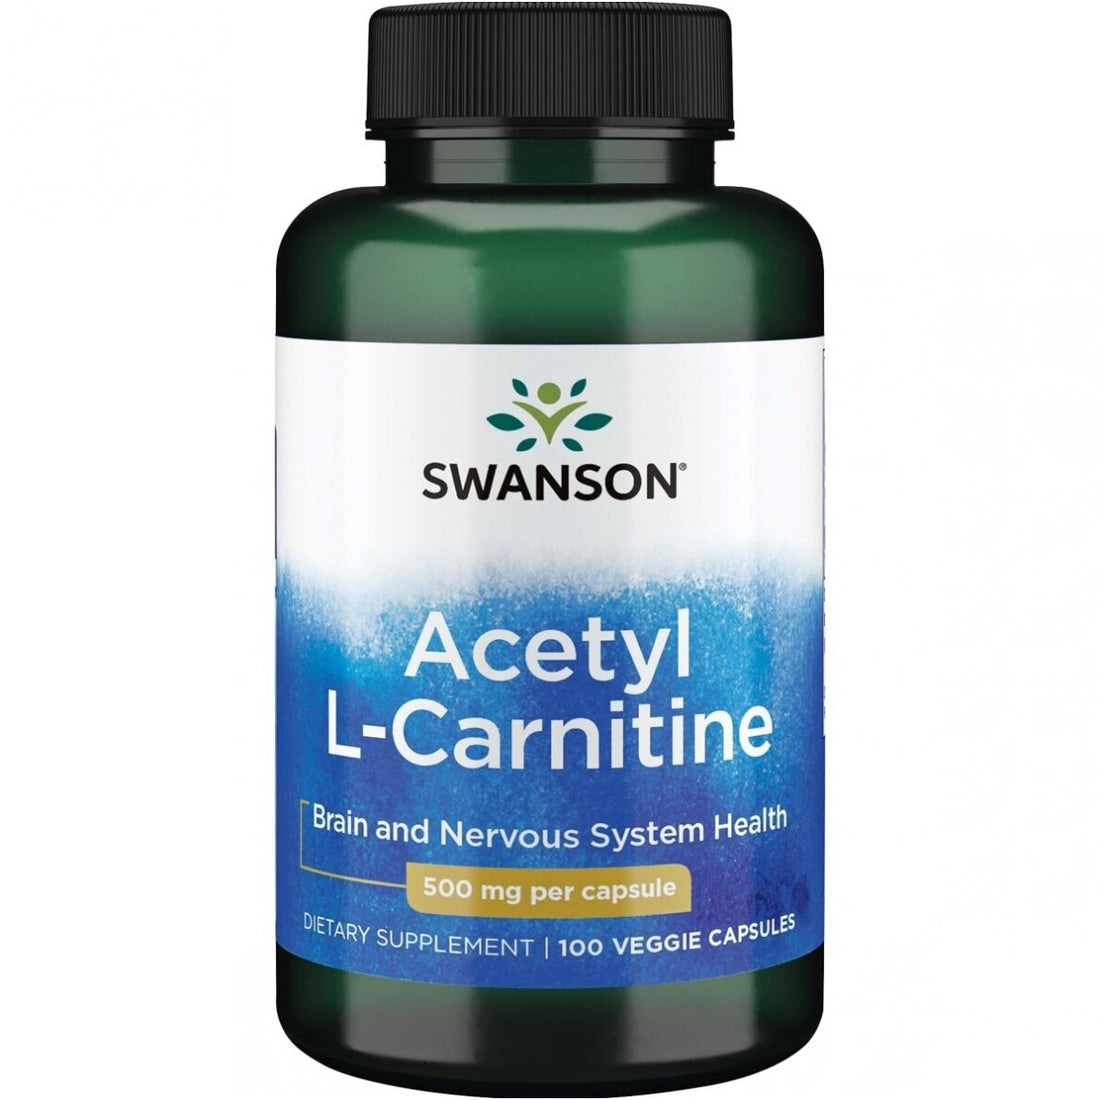 SWANSON ACETYL L-CARNITINE 500MG, 100 CAPSULES